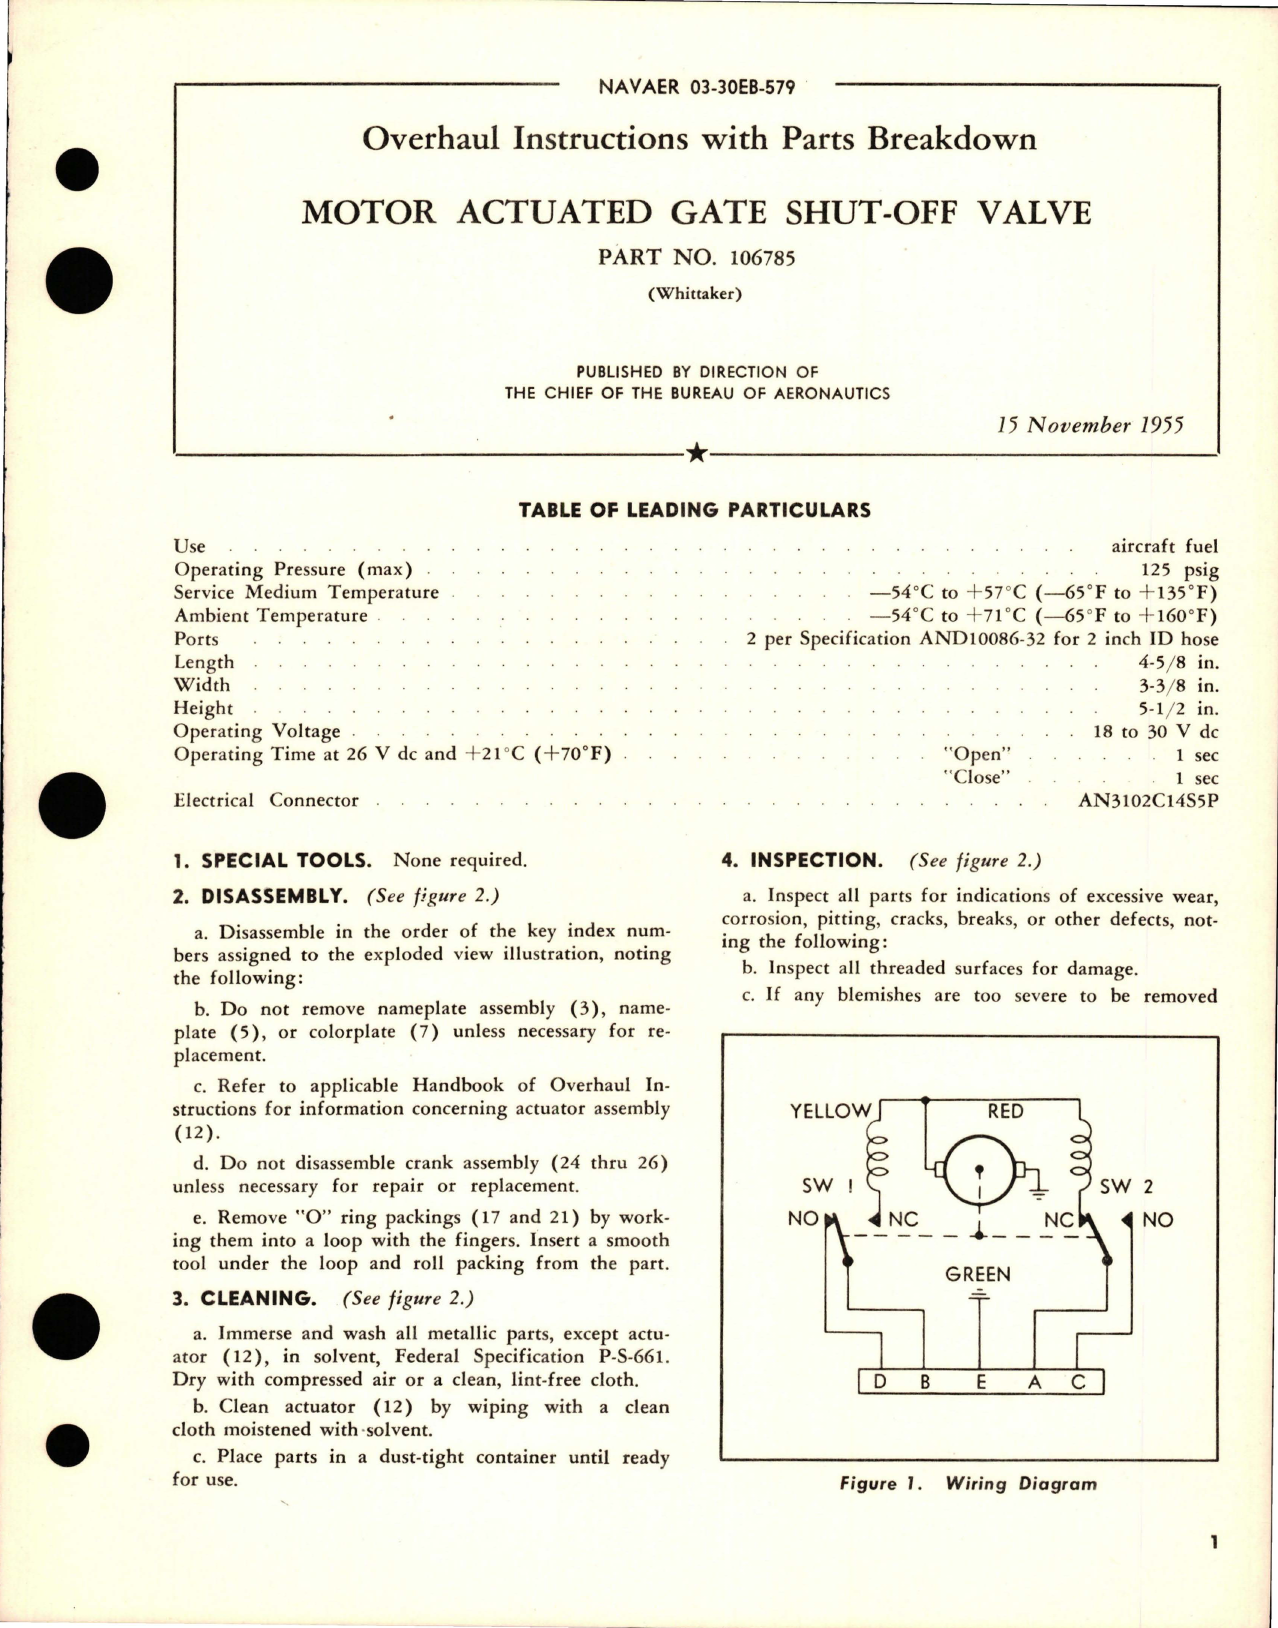 Sample page 1 from AirCorps Library document: Overhaul Instructions with Parts Breakdown for Motor Actuated Gate Shut-Off Valve - Part 106785